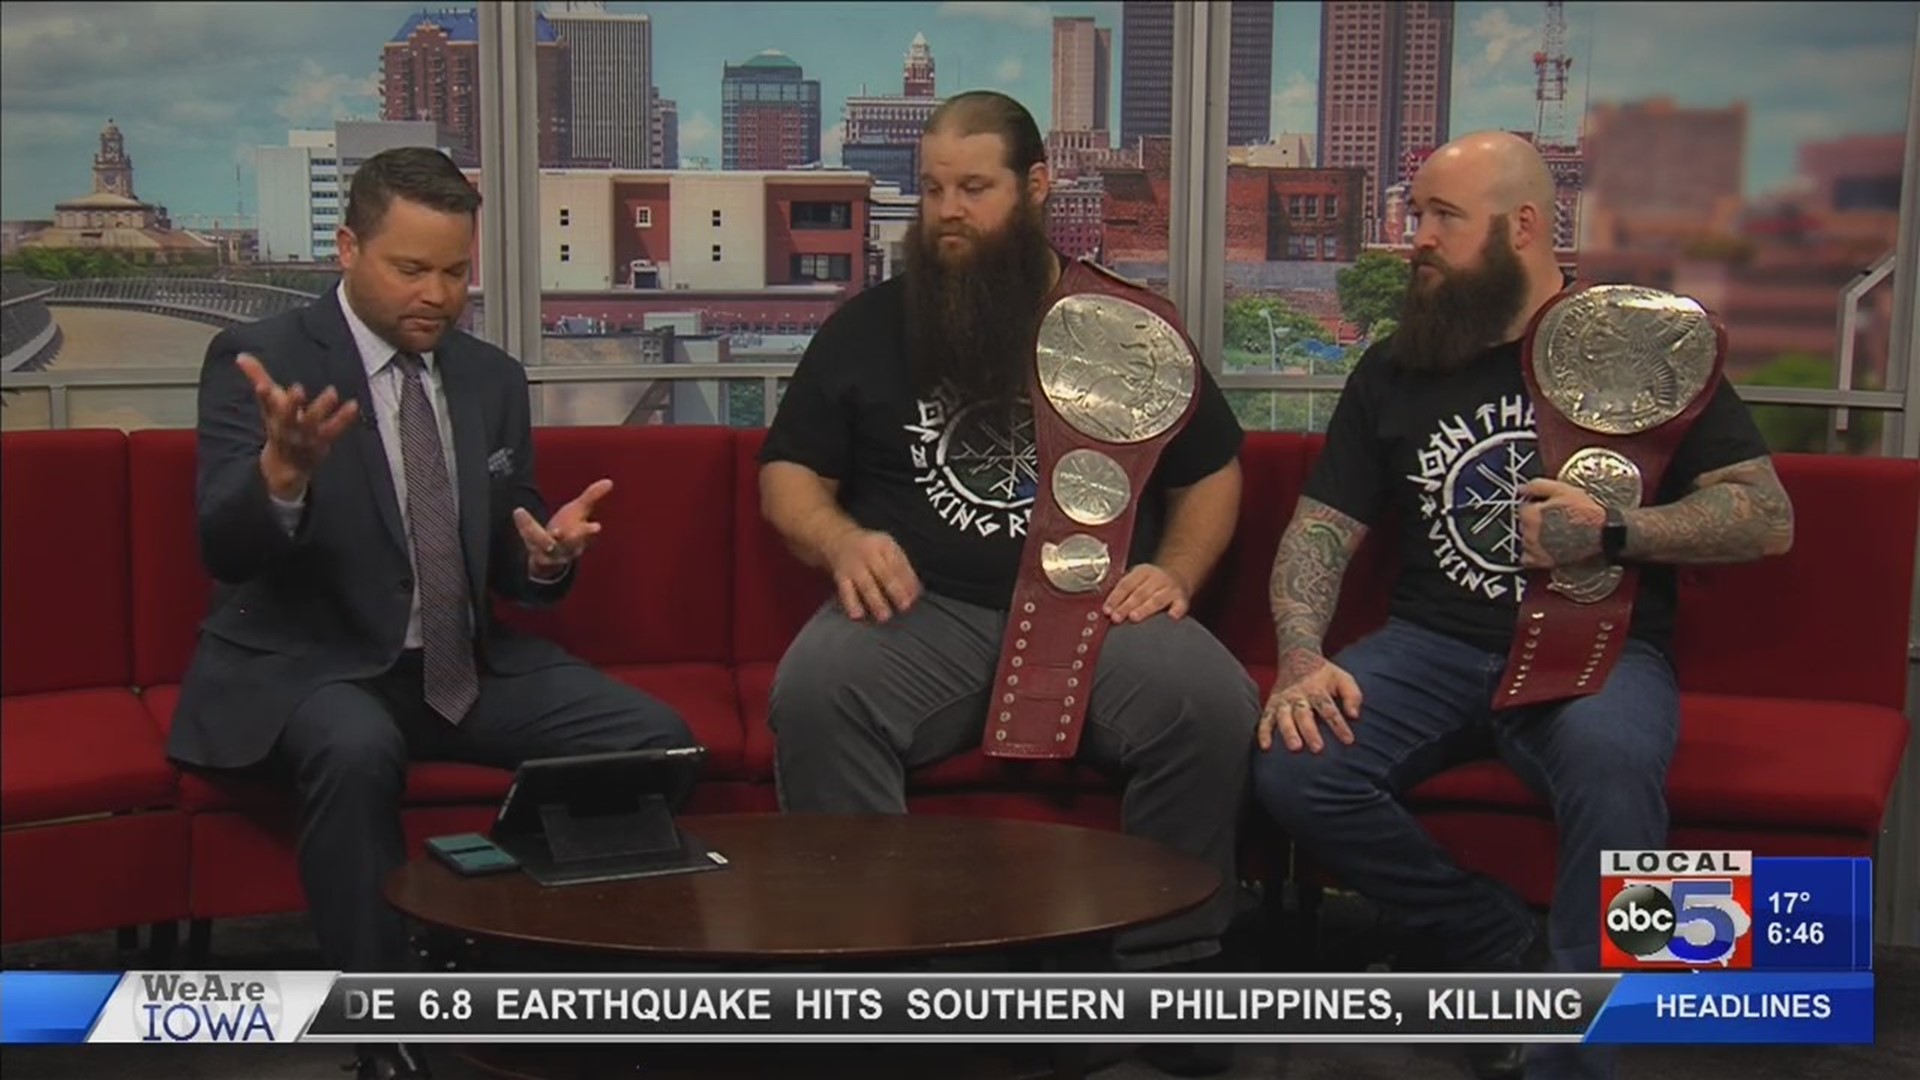 The Viking Raiders will defend their title as champions when WWE Monday Night Raw comes to Wells Fargo Arena for the last time in 2019.